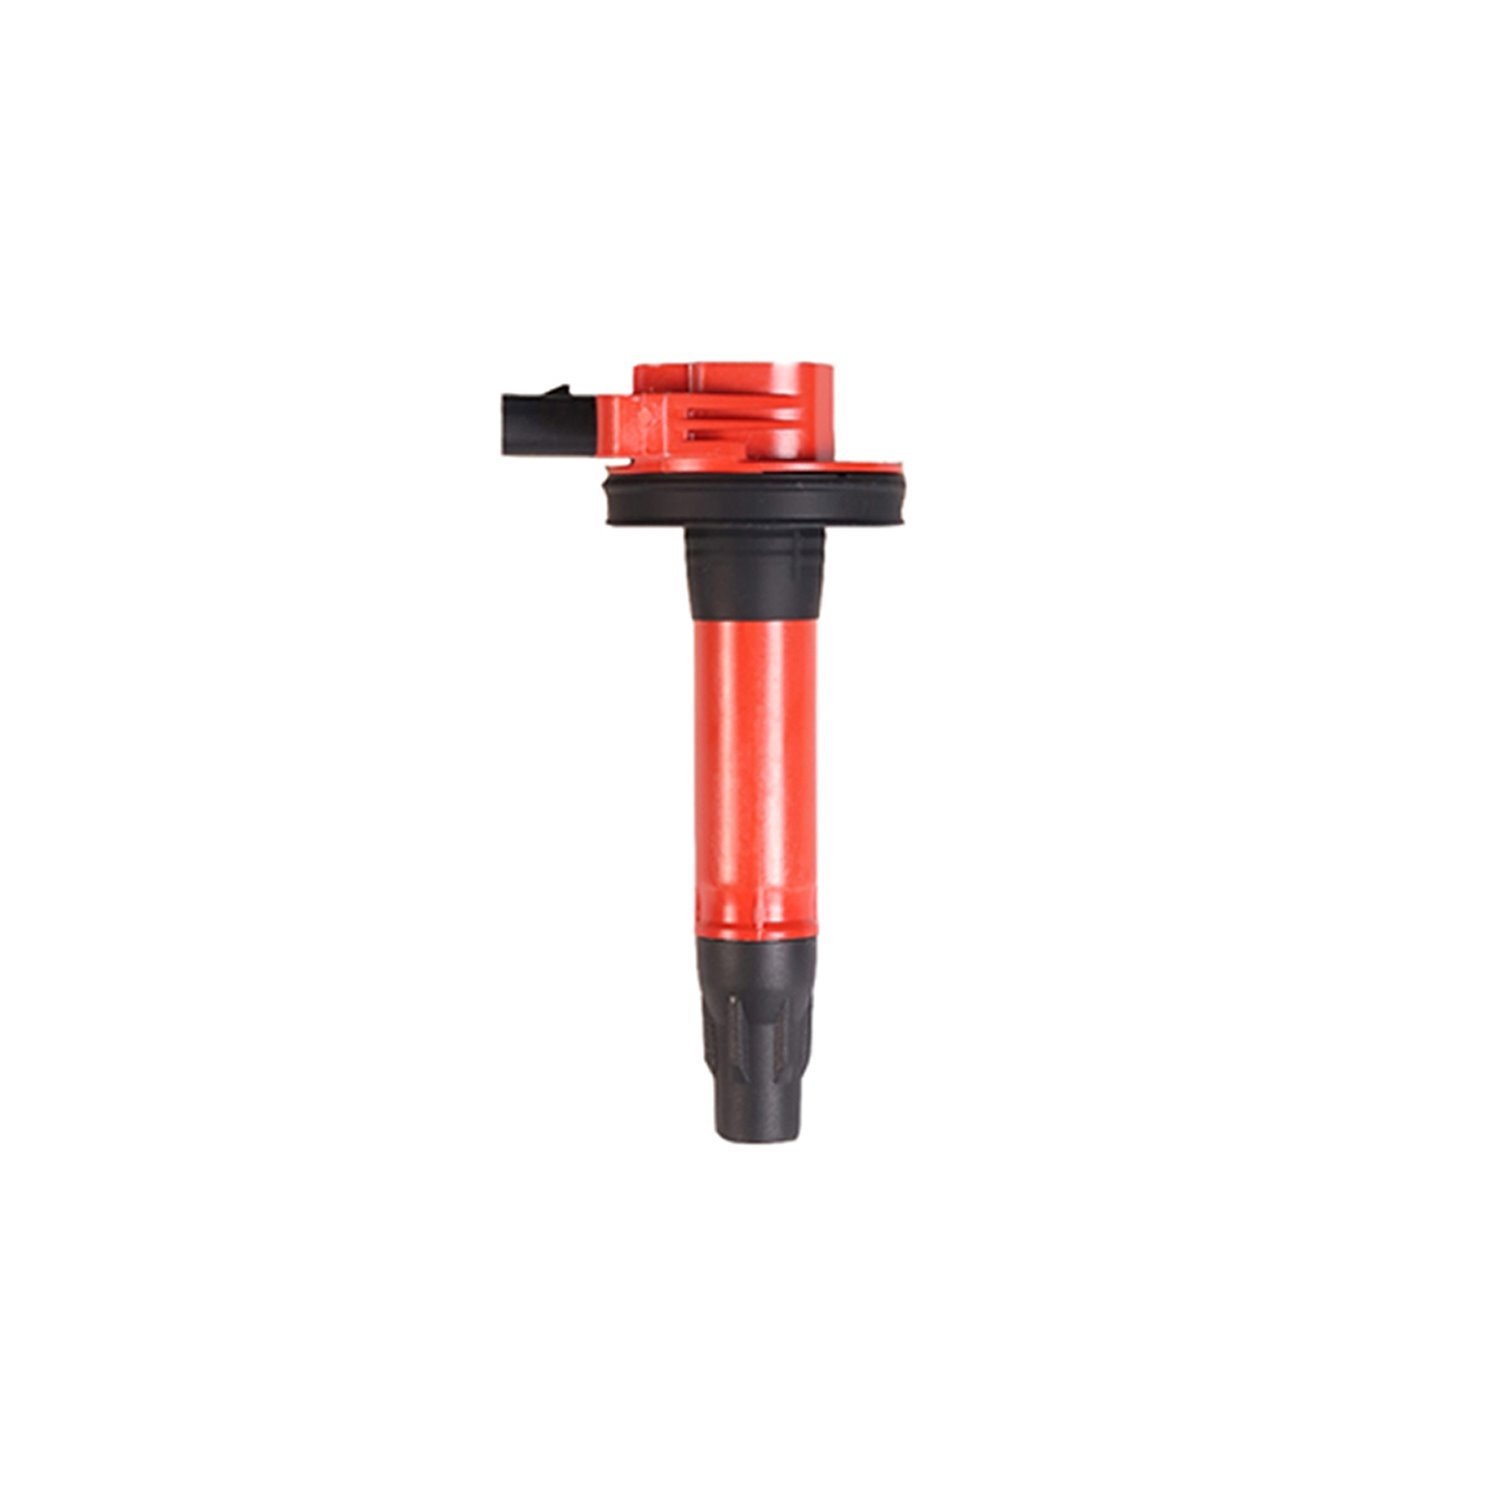 High-Performance Ignition Coil for Lincoln/Mazda 3.7L/3.5L V6 [Red]